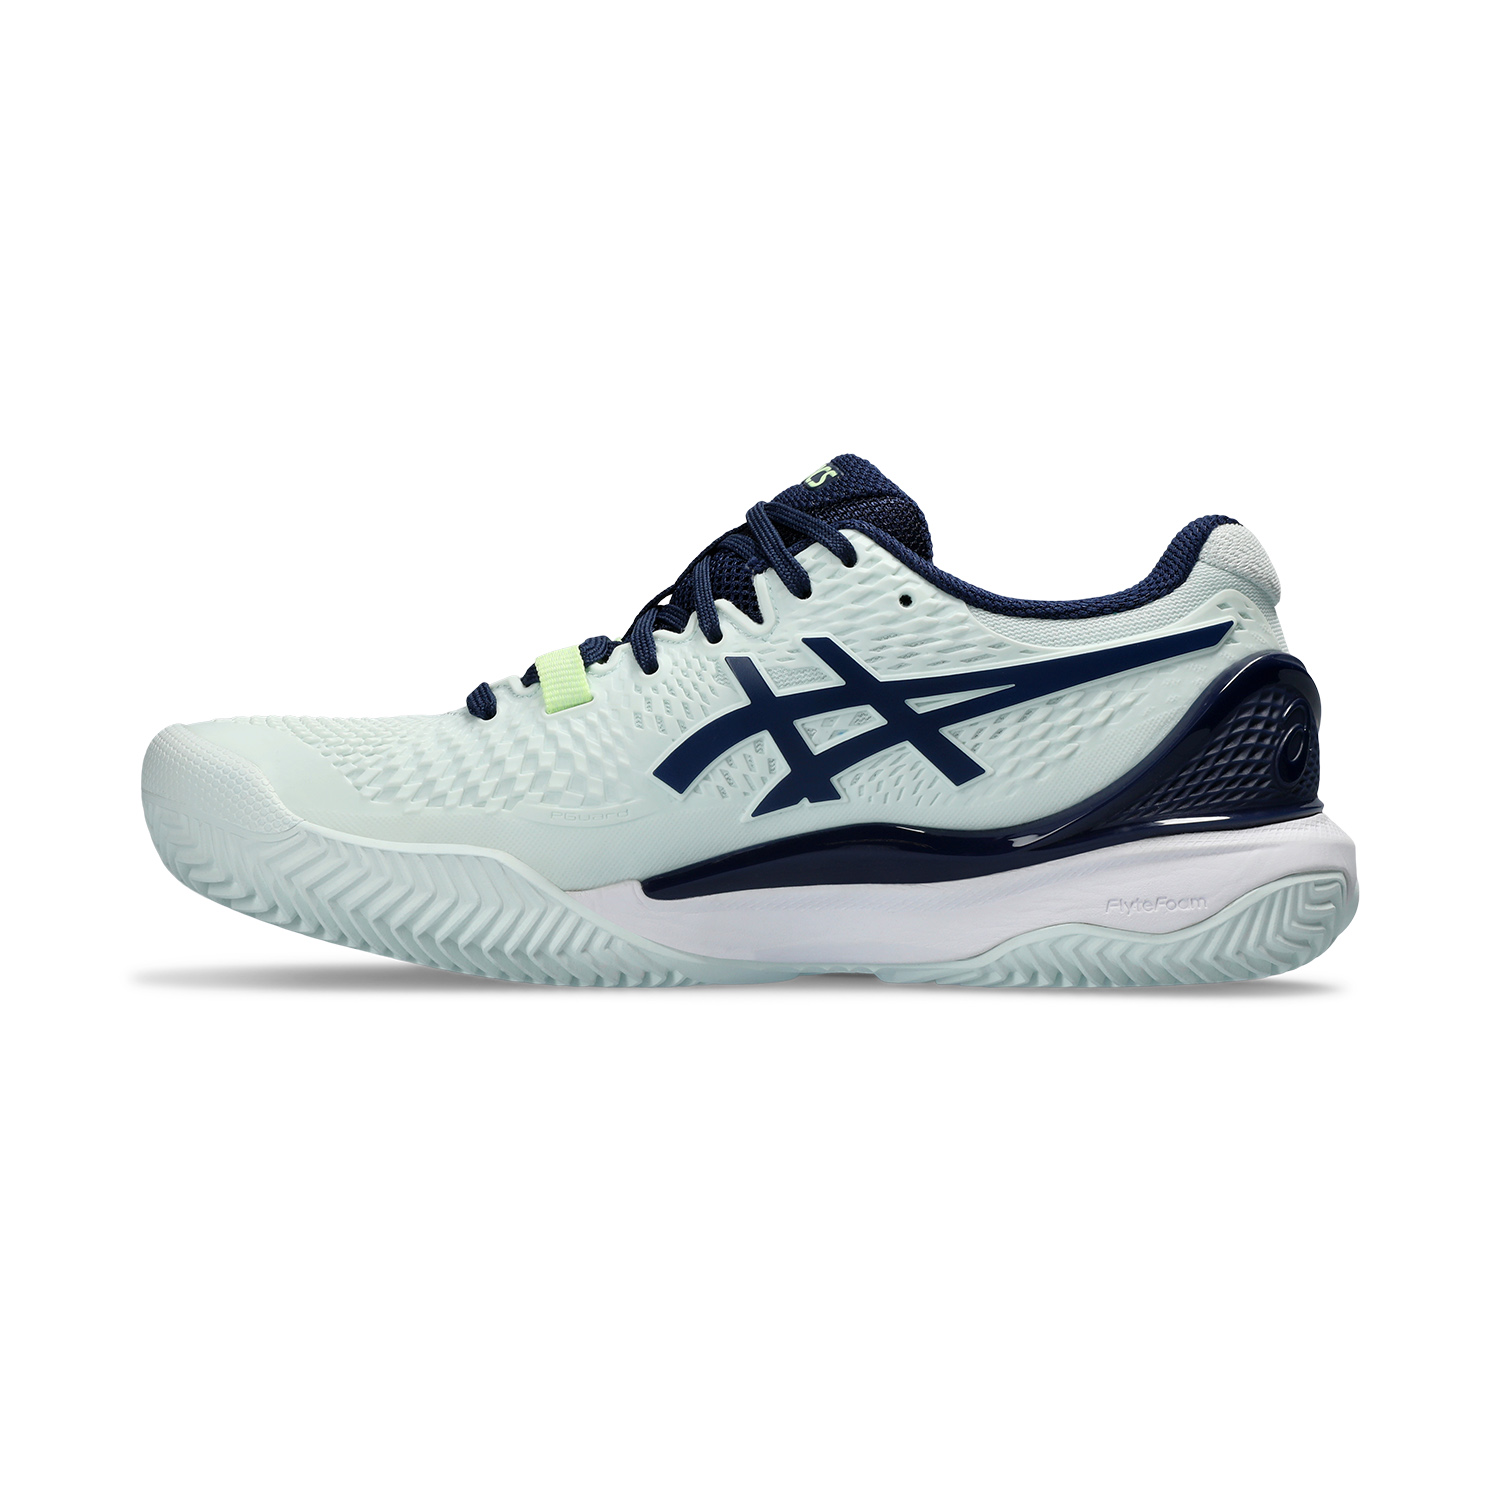 Asics Gel Resolution 9 Clay - Pale Mint/Blue Expanse